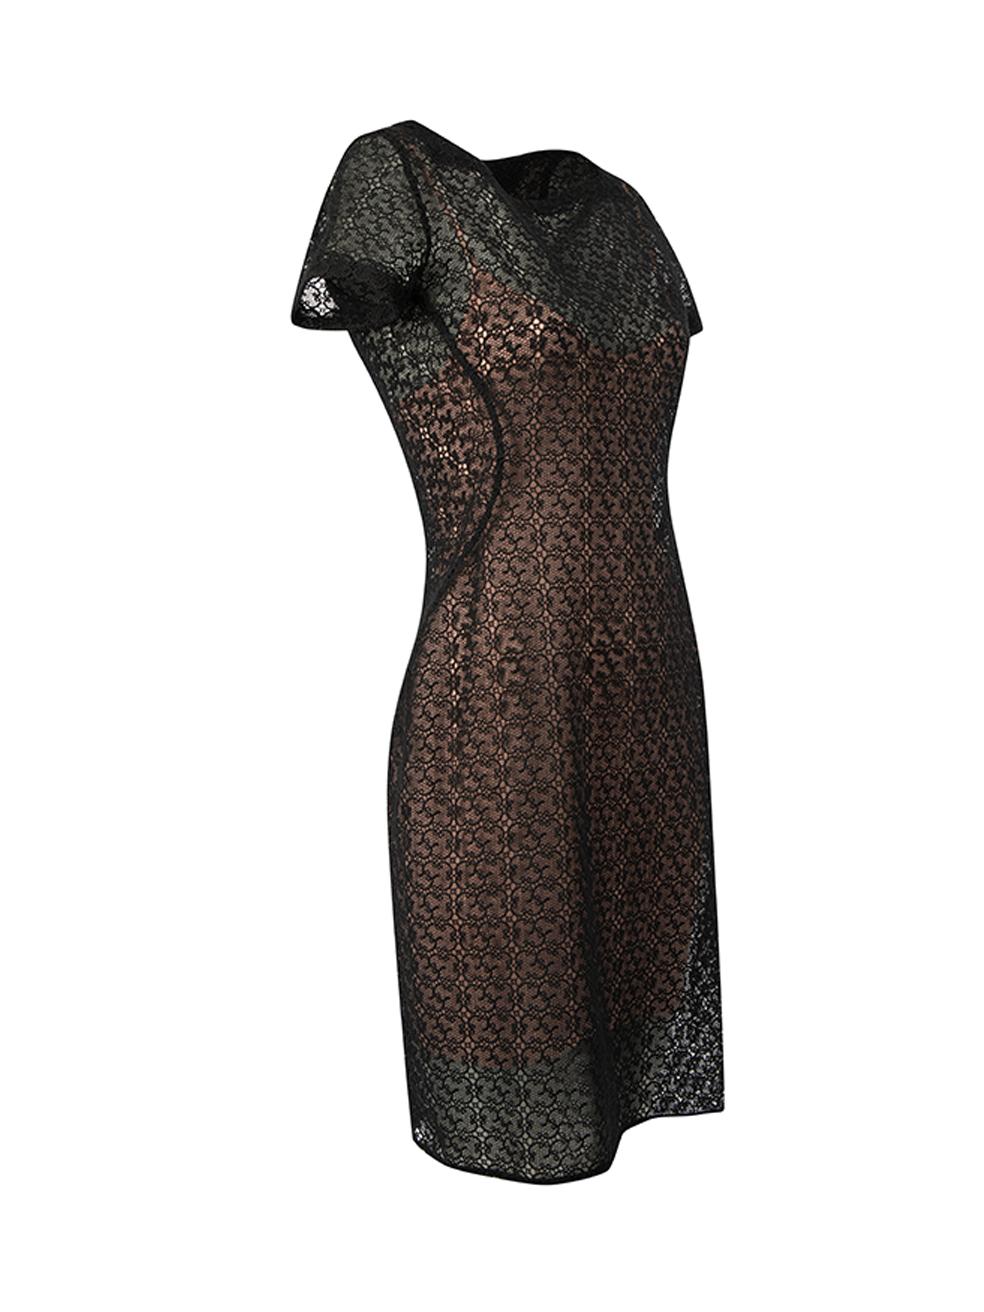 CONDITION is Very good. Hardly any visible wear to dress is evident on this used Pierre Mantoux for Alaïa designer resale item.



Details


Black

Lace

Short cap sleeves dress

Mini length

Round neckline

Back zip closure with hook and eye

Pink